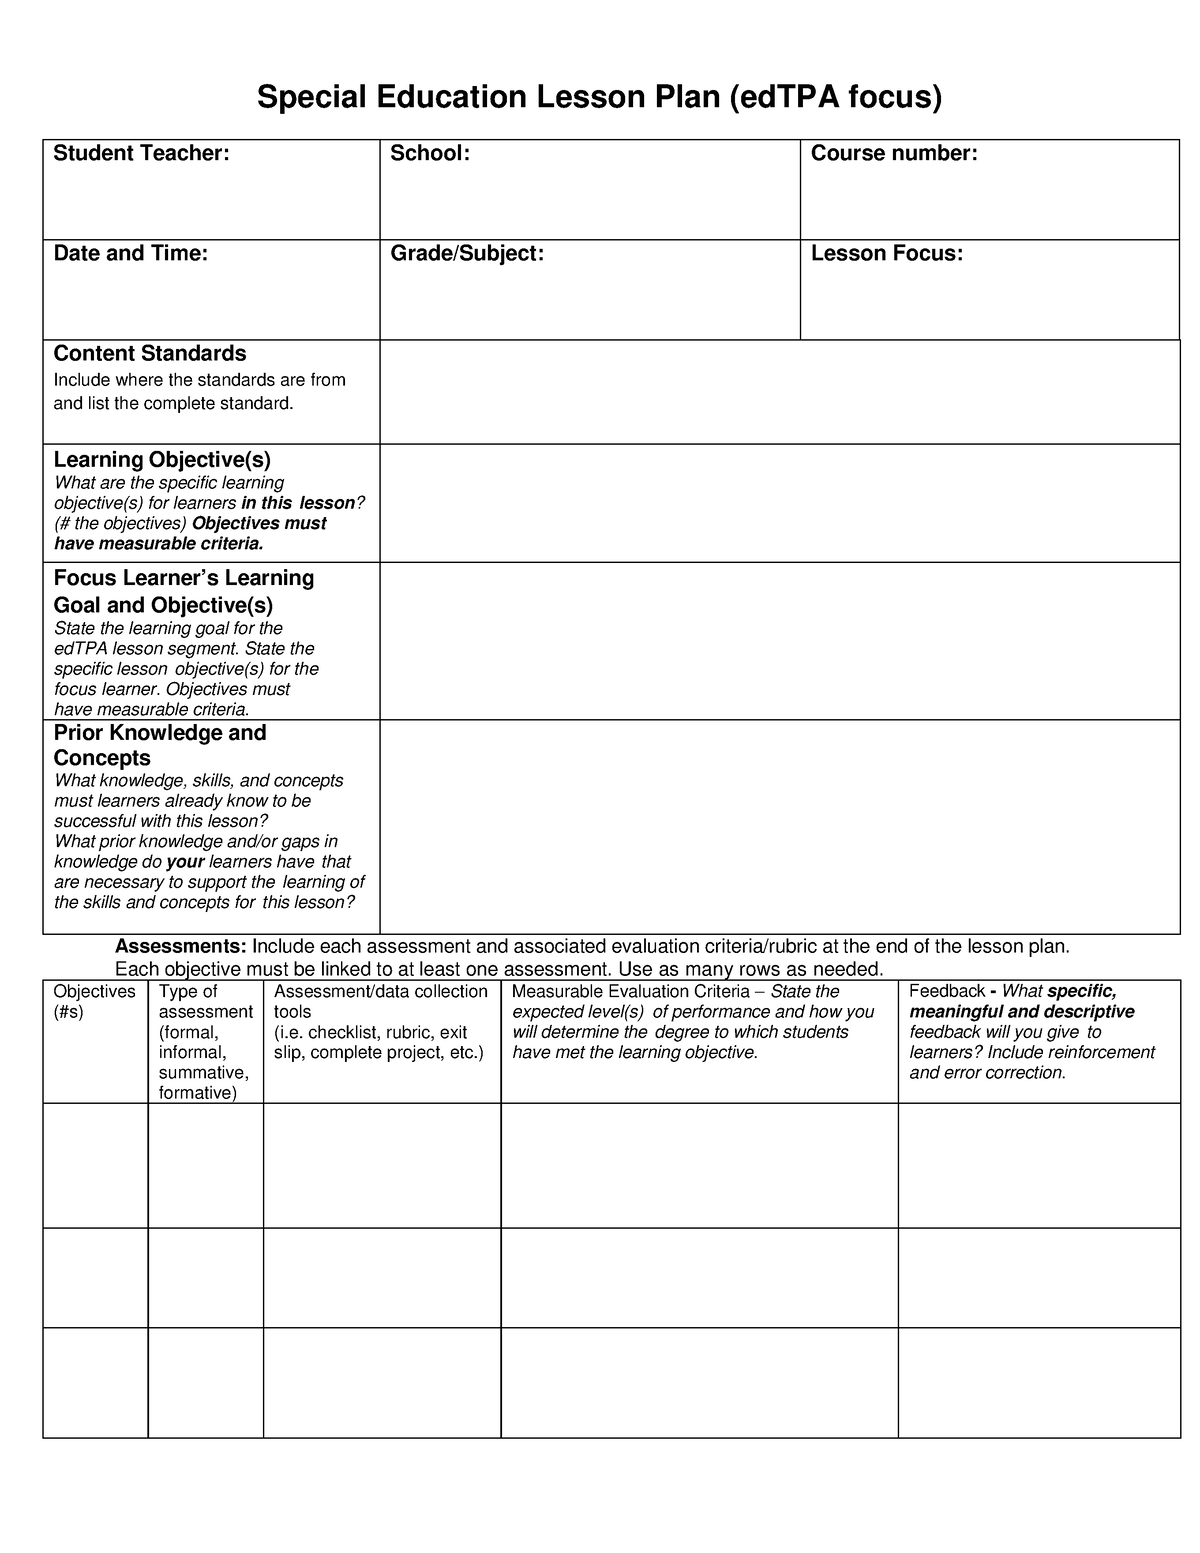 special-education-lesson-plan-template-special-education-lesson-plan